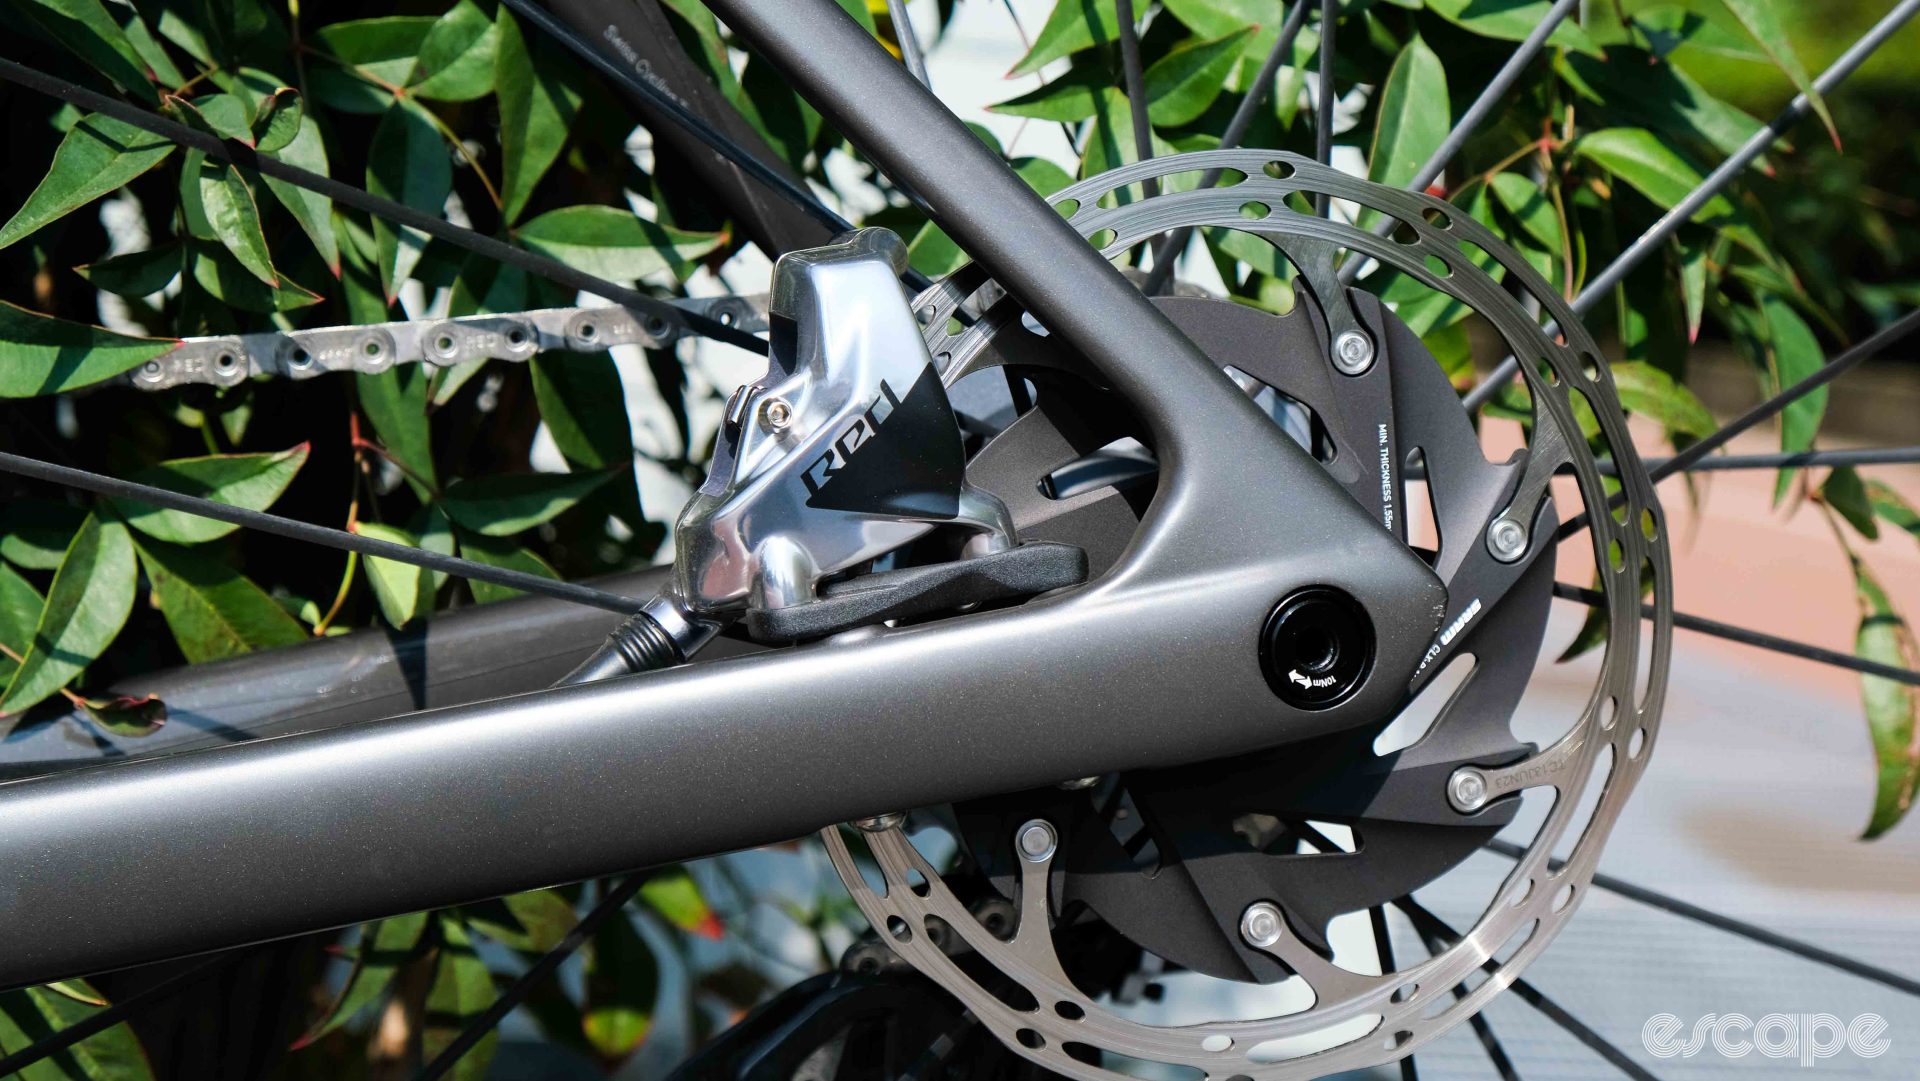 The photo shows a chain stay to seat stay bridge on BMC's new TeamMachine R 01 race bike.